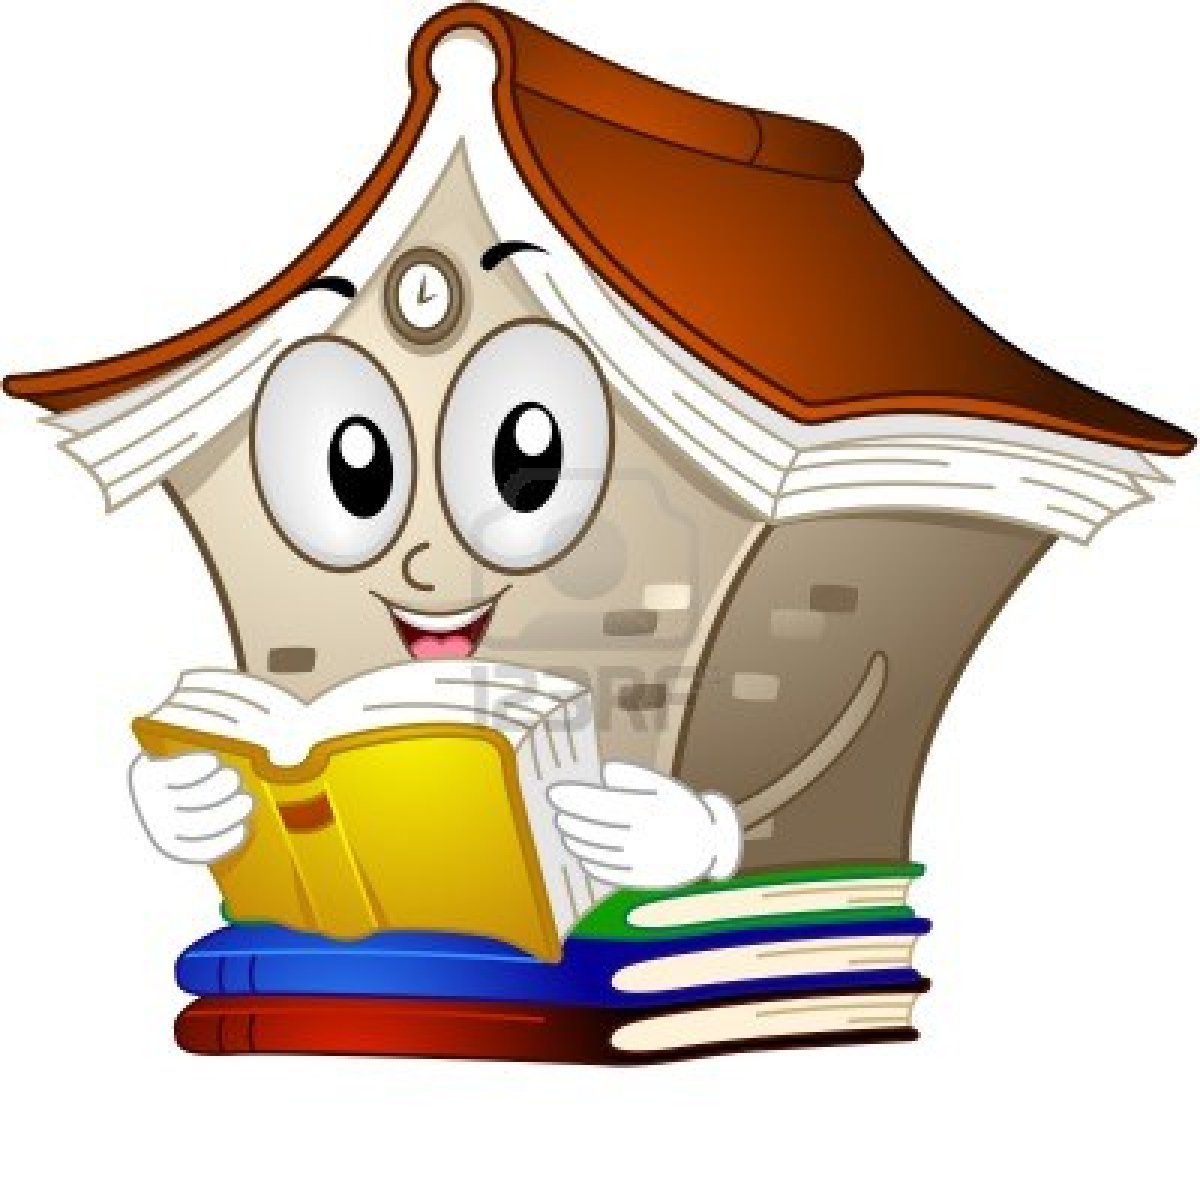 12917521-illustration-of-a-library-mascot-reading-a-book.jpg